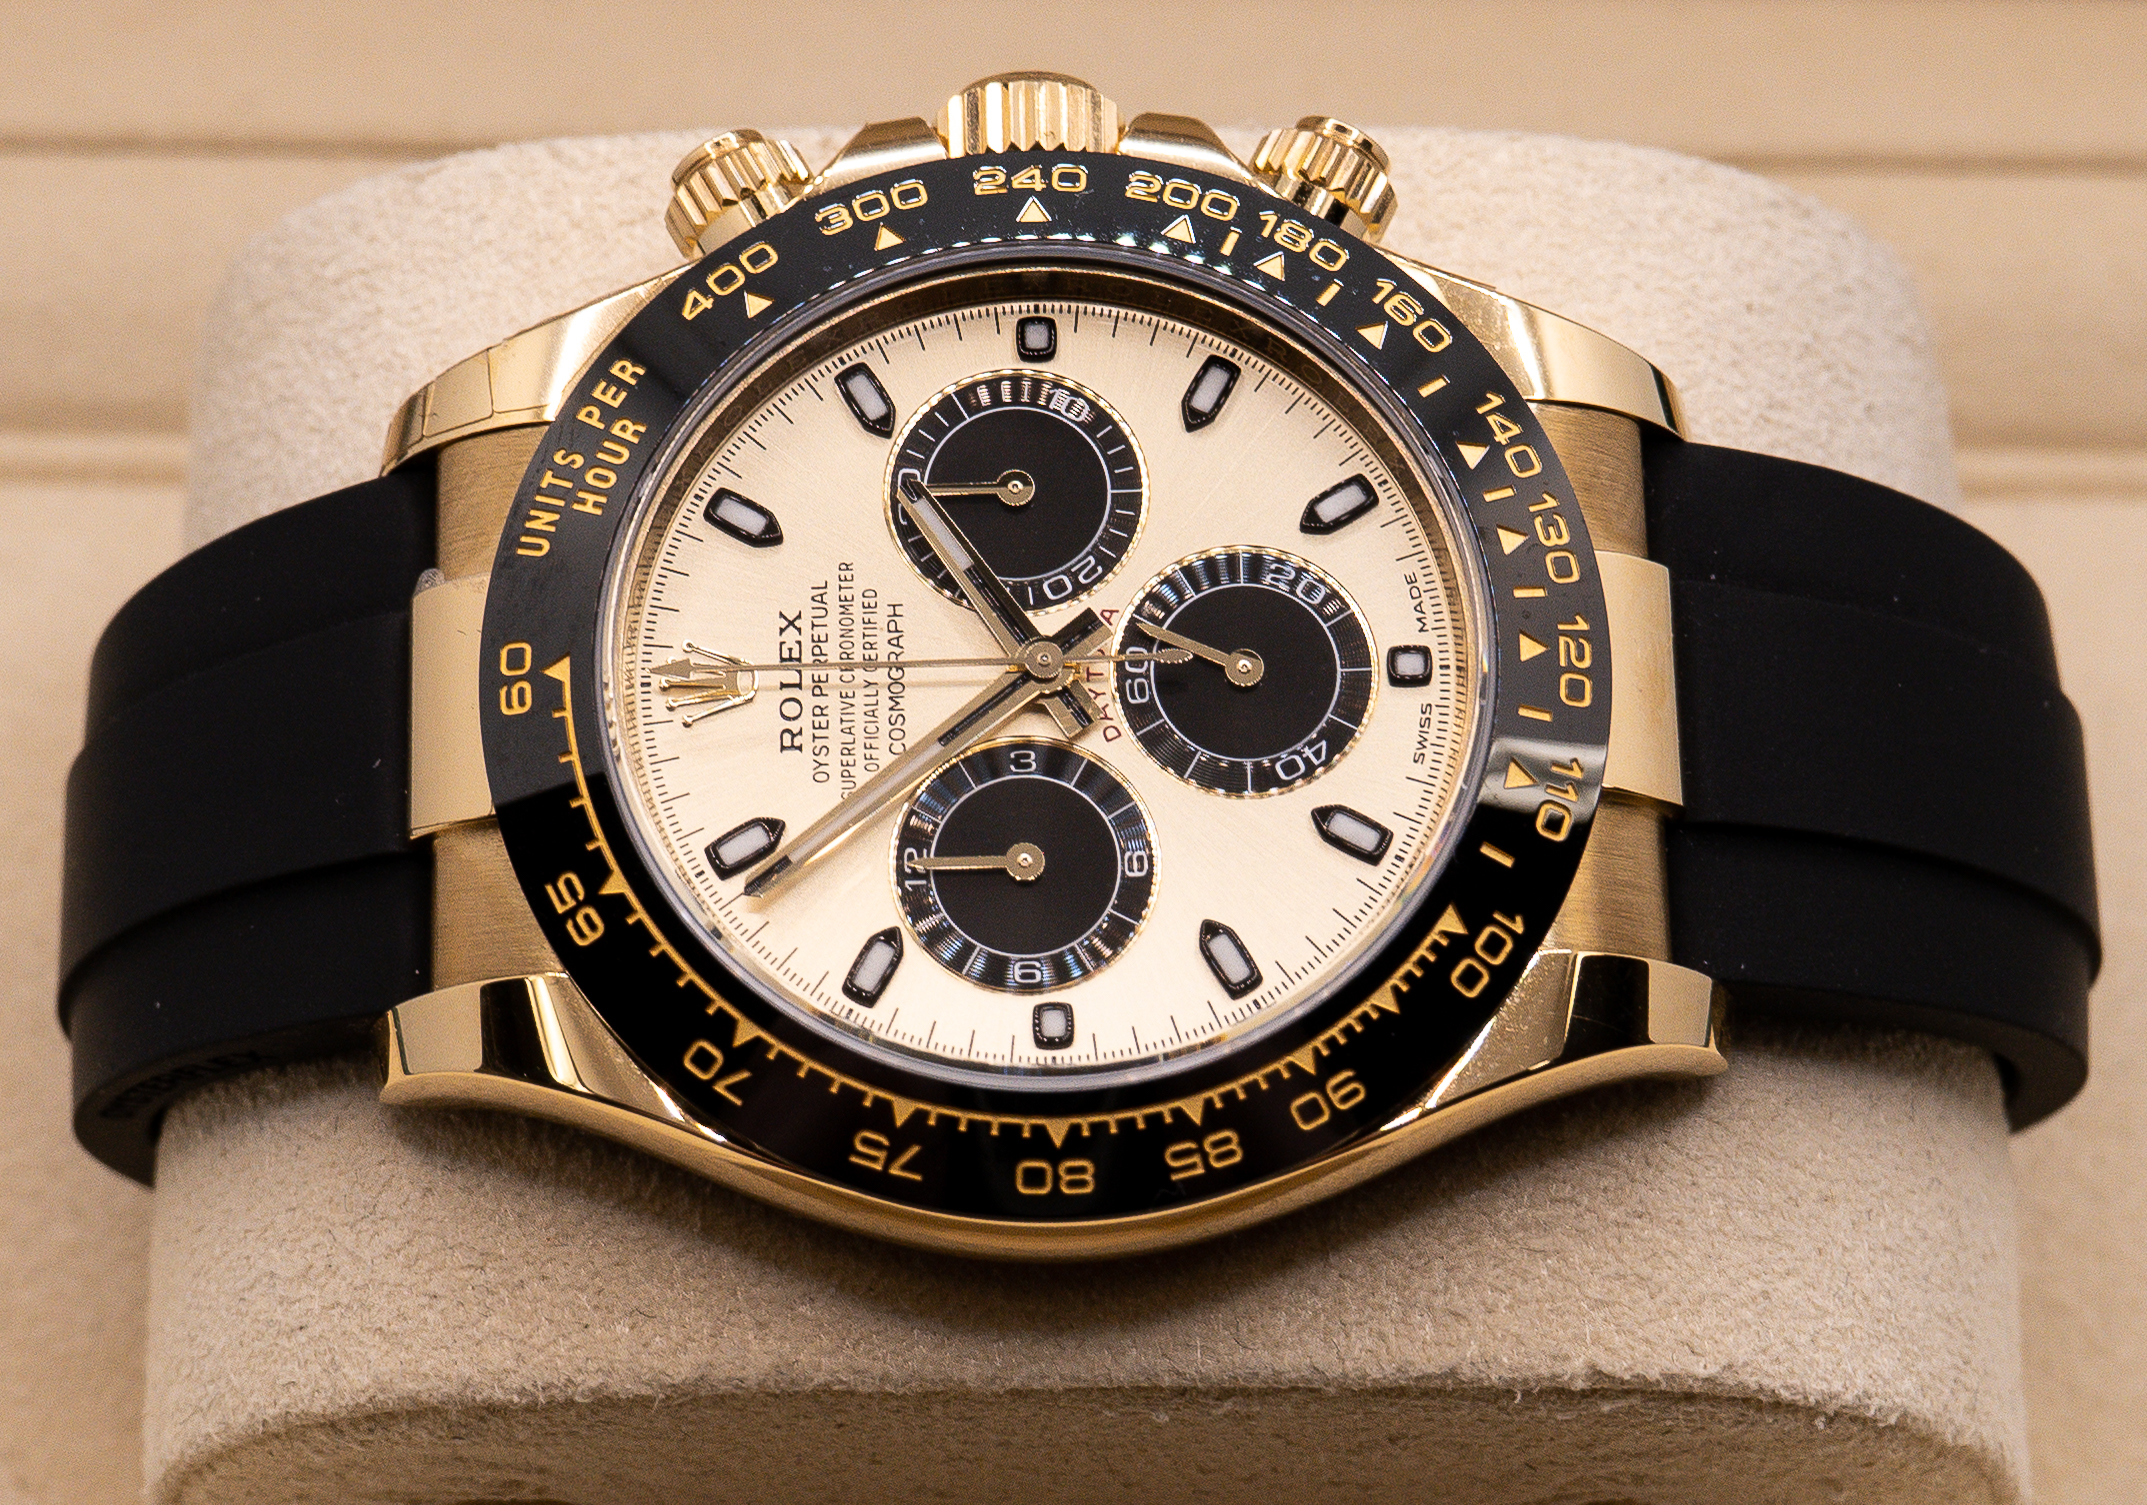 Pre-Owned Rolex Watches Buffalo, NY